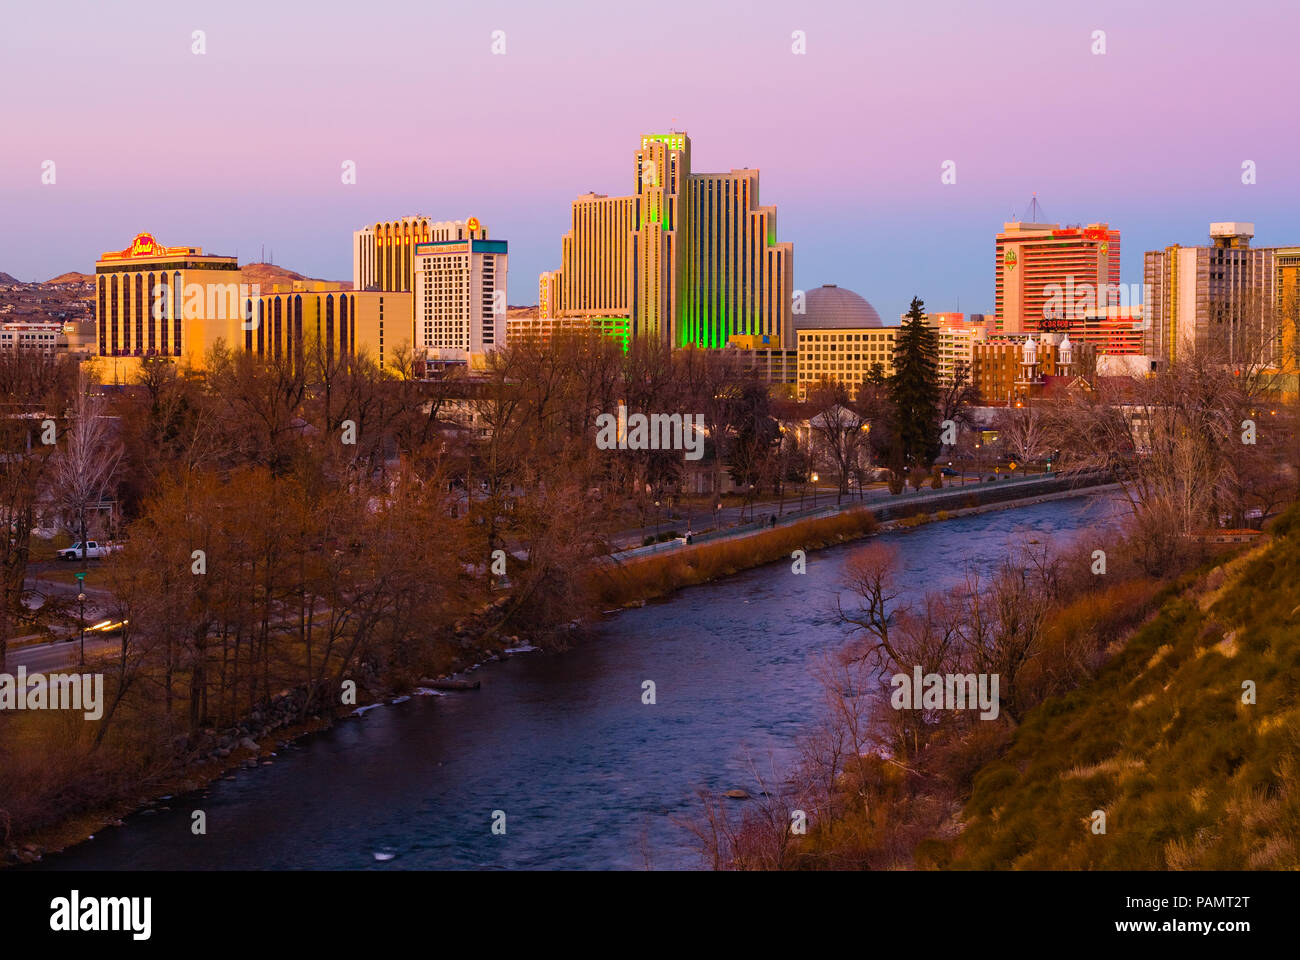 Scenic landscape of Reno city at sunset with river on foreground Stock Photo